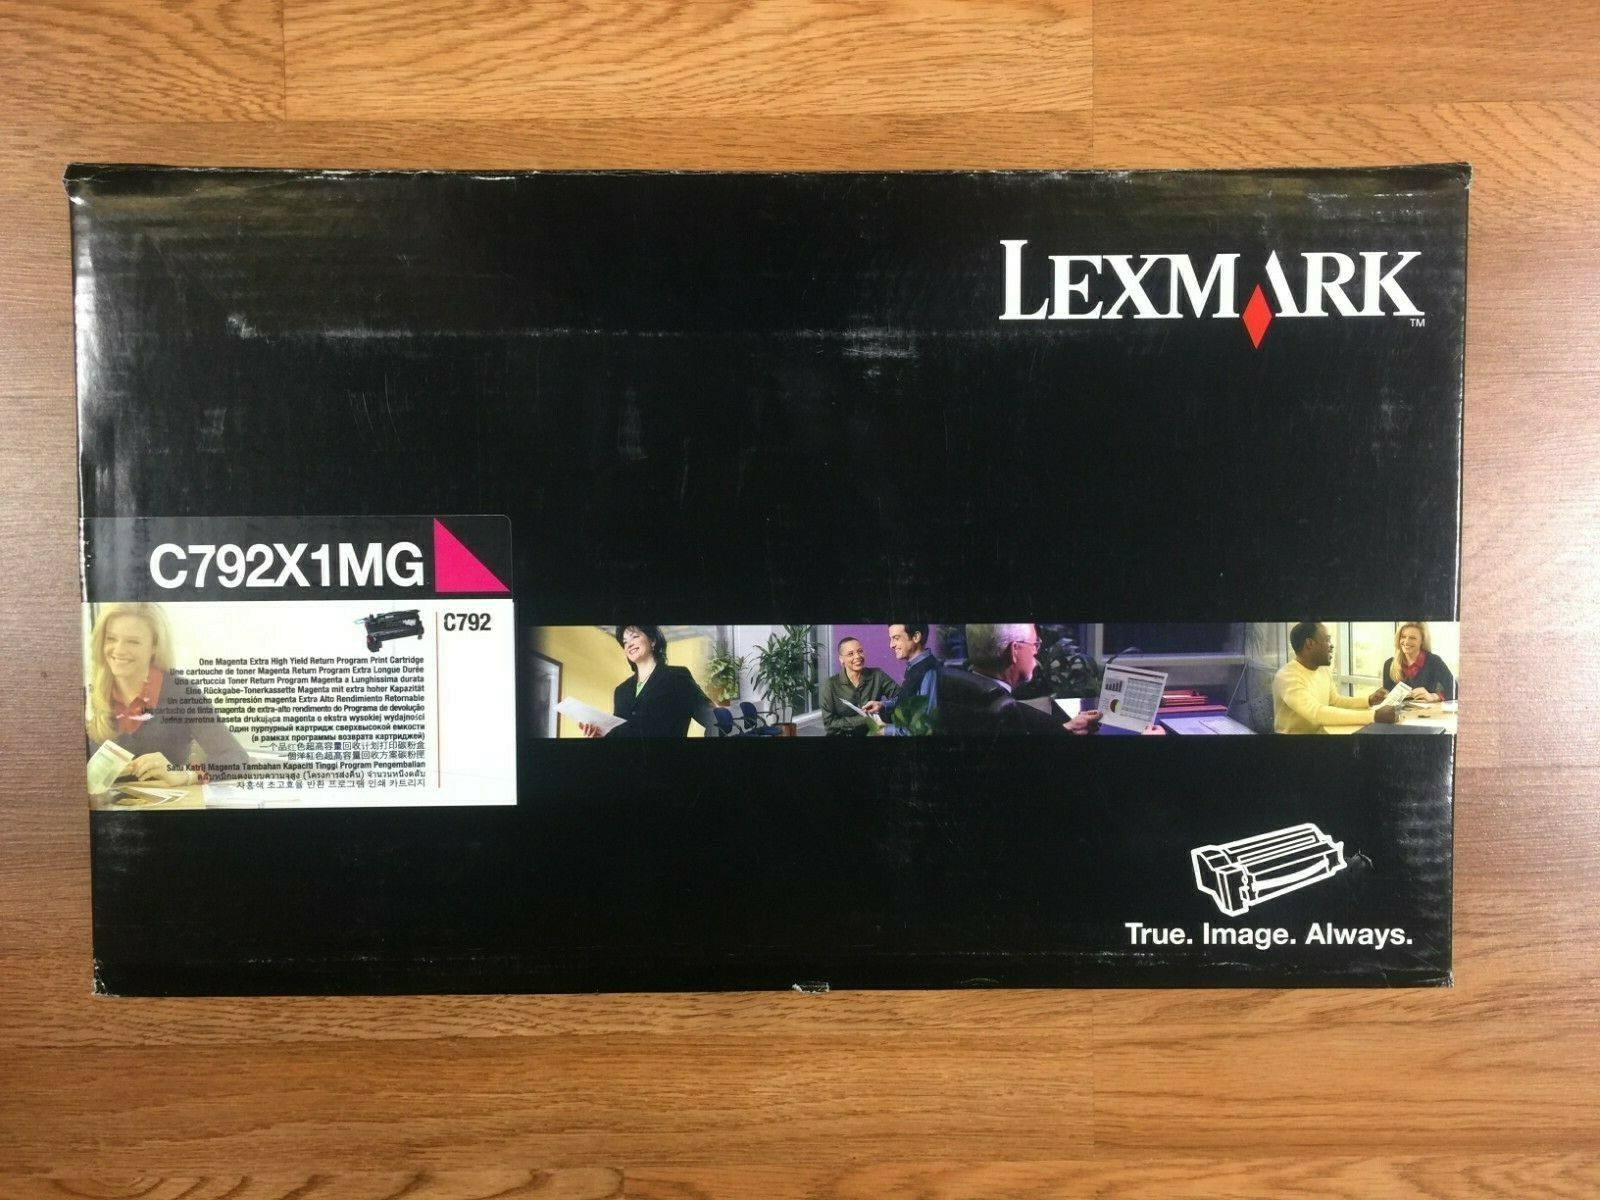 Lexmark C792X1MG Magenta Extra High Yield For C792 Open Box Please See Pictures - $345.51